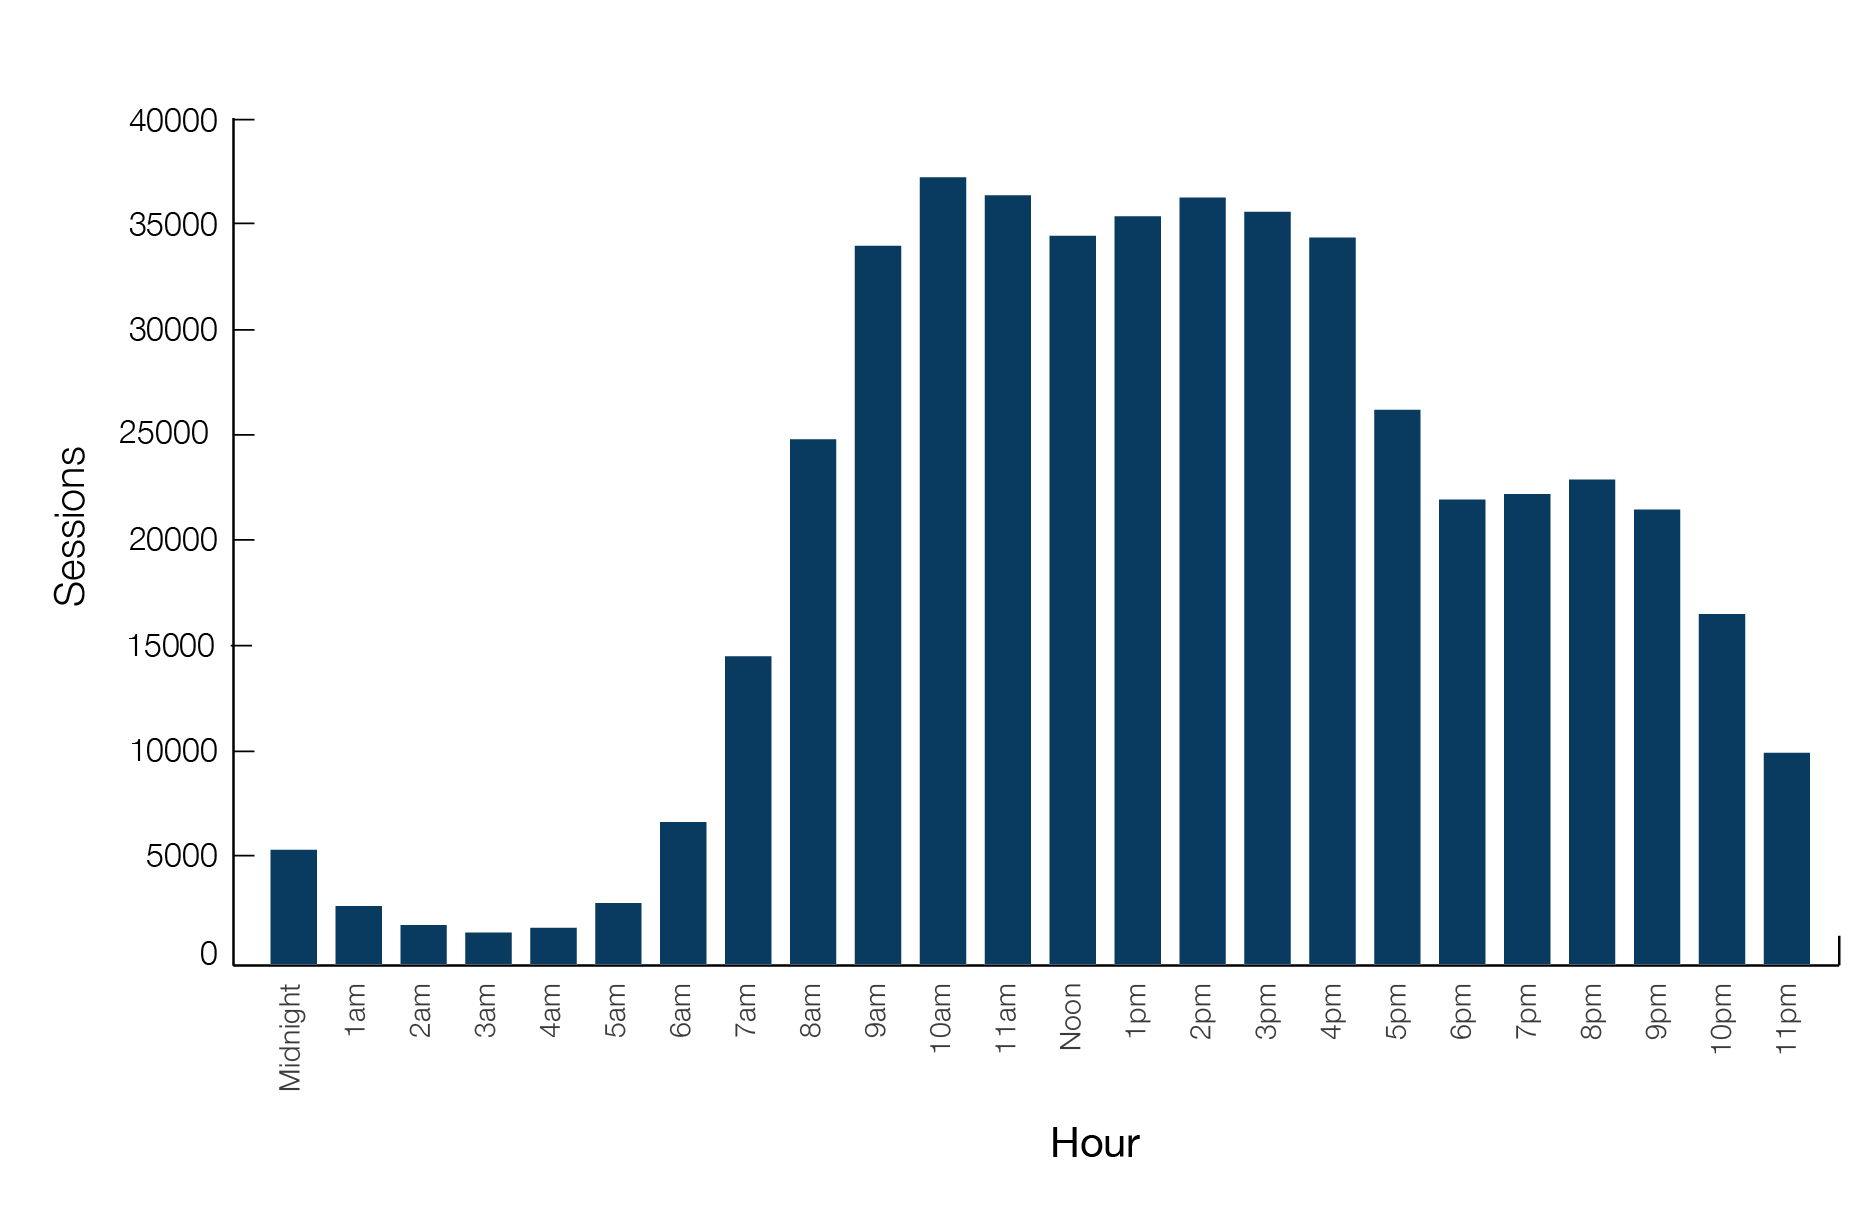 A graph showing the number of sessions on our website and what time these sessions occurred. For example, at midnight, there were 5,434 sessions. At 1am, there were 2,758 sessions. At 2am, there were 1,866 sessions. At 3am, there were 1,504 sessions. At 4am, there were 1,727 sessions. At 5am, there were 2,912 sessions. At 6am, there were 6,757 sessions. At 7am, there were 14,636 sessions. At 8am, there were 24,936 sessions. At 9am, there were 34,134 sessions. At 10am, there were 37,390 sessions. 